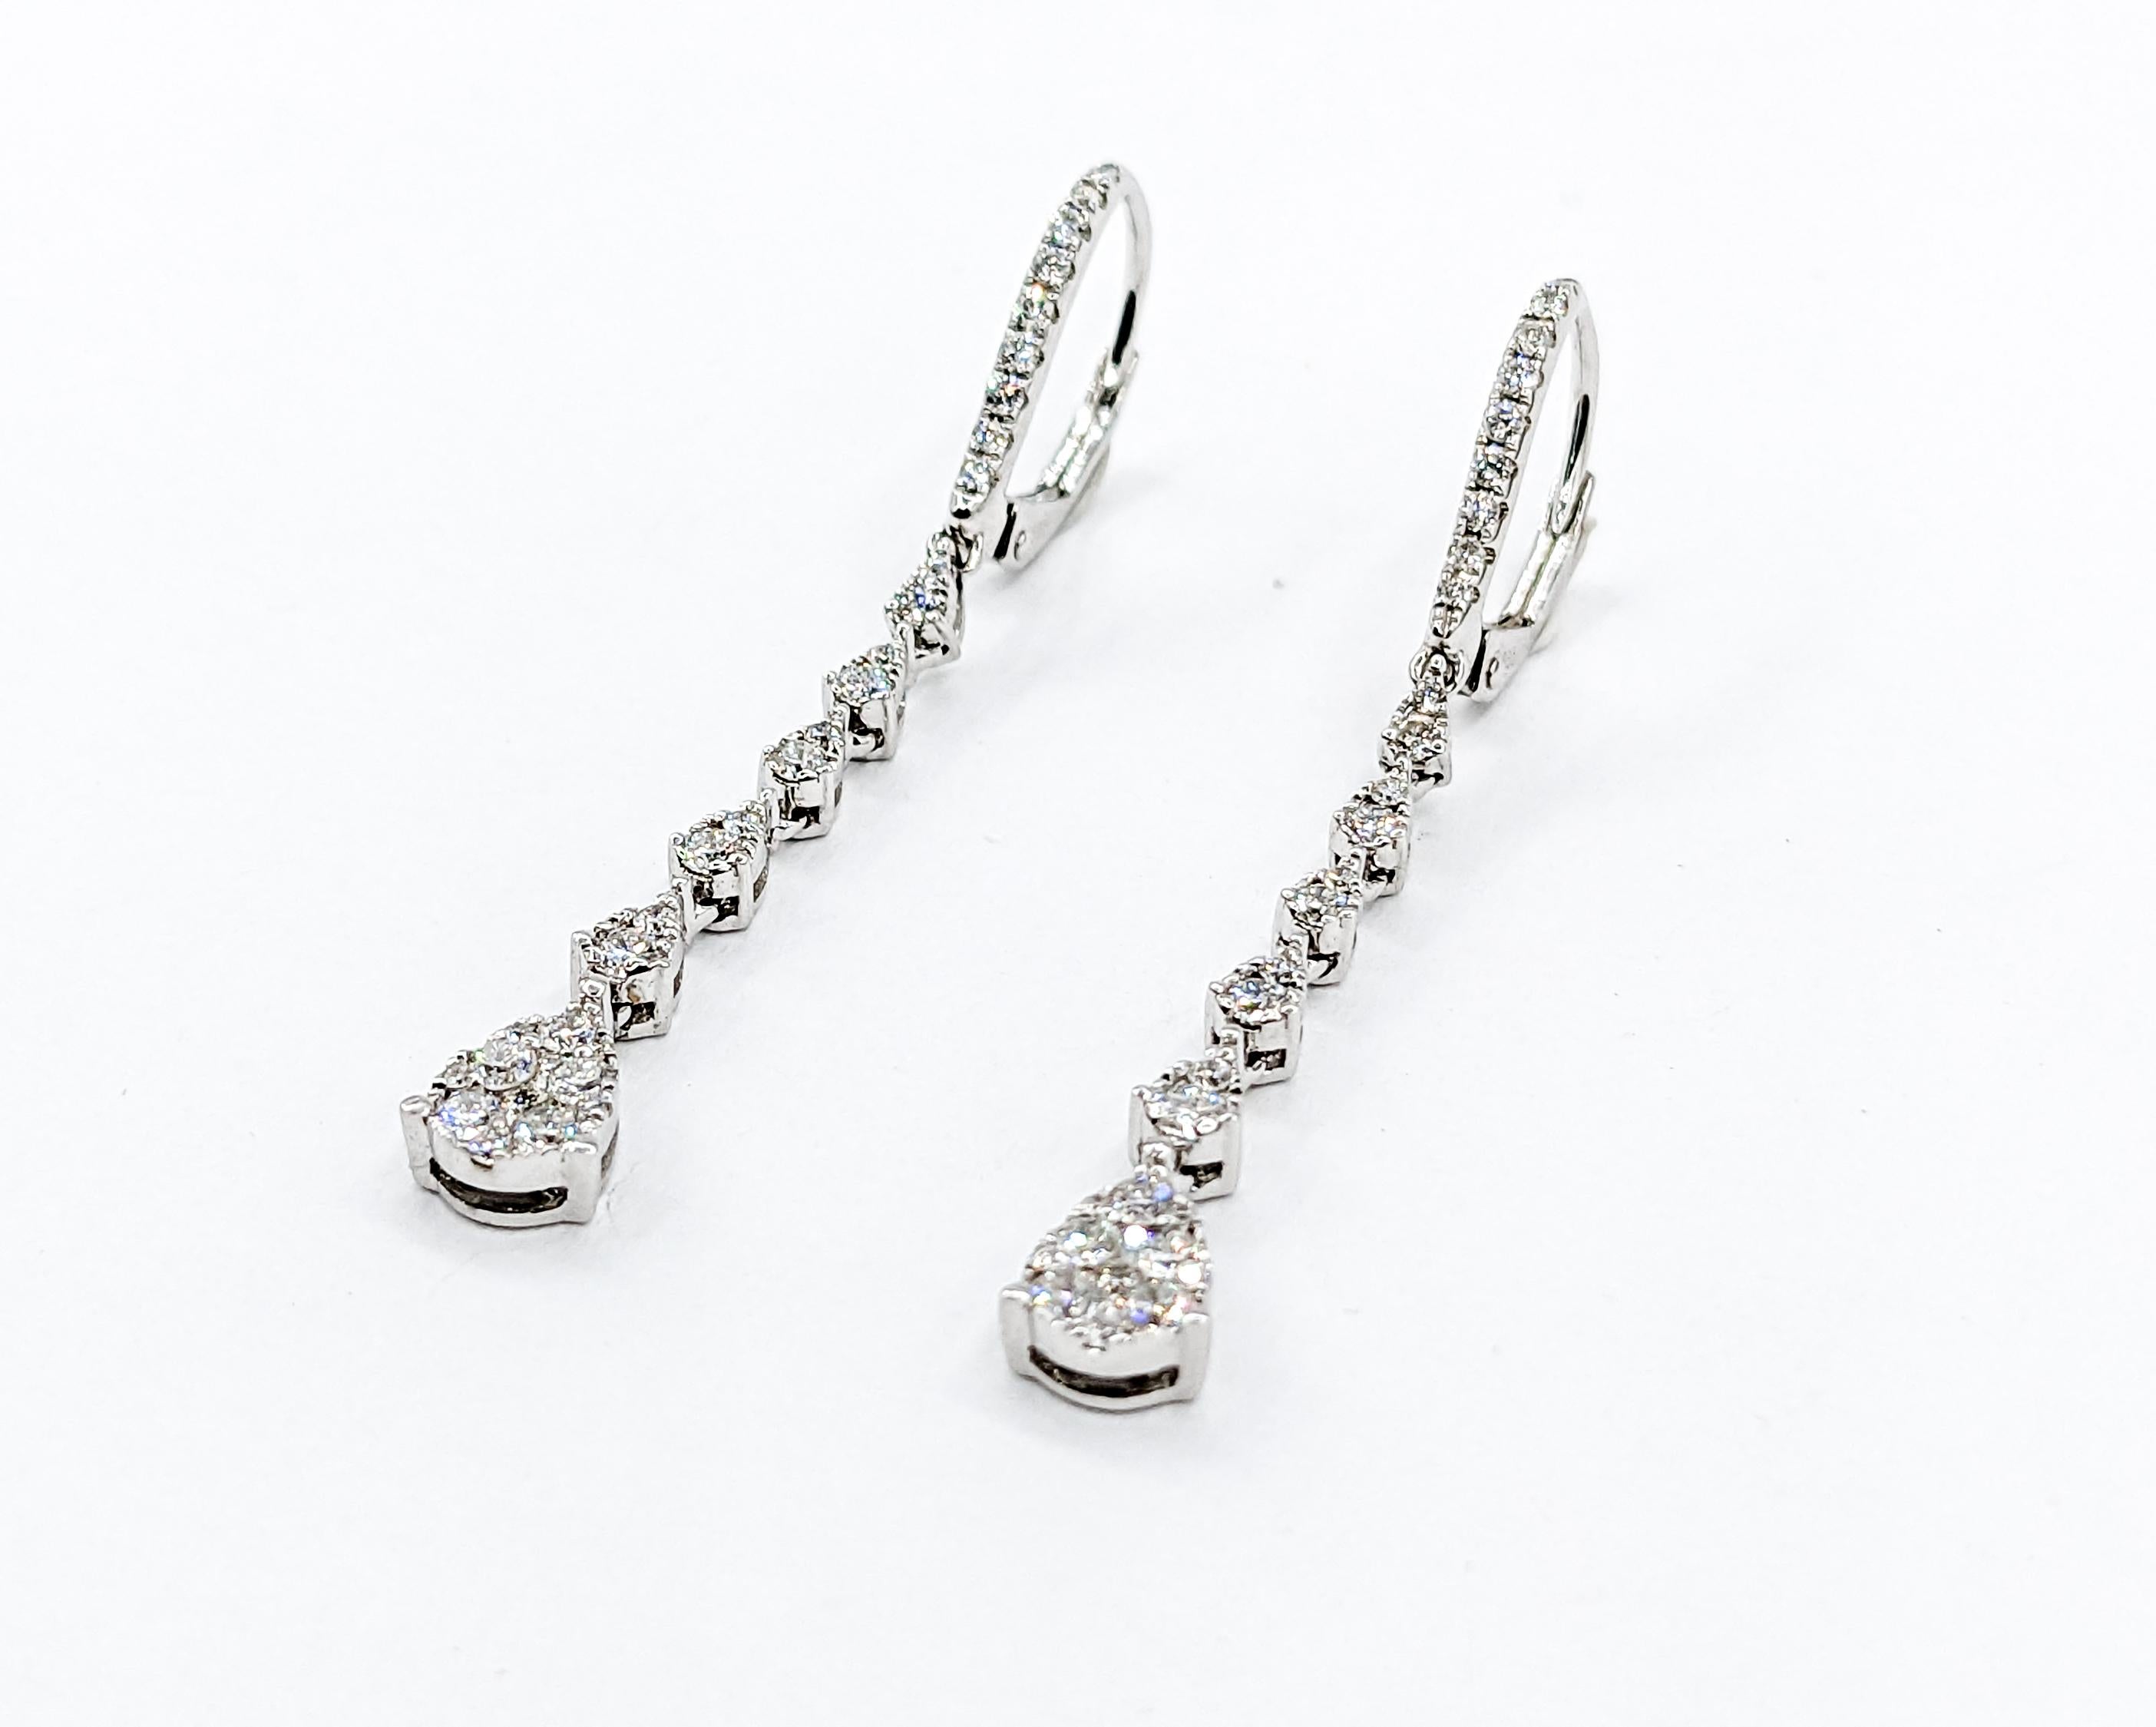 .84ctw VS Quality Diamond Quality Dangle Earrings

Discover the allure of these beautiful earrings, expertly crafted in the luminous 14kw white gold that promises both durability and elegance. They proudly feature a cascading display of 0.84ctw